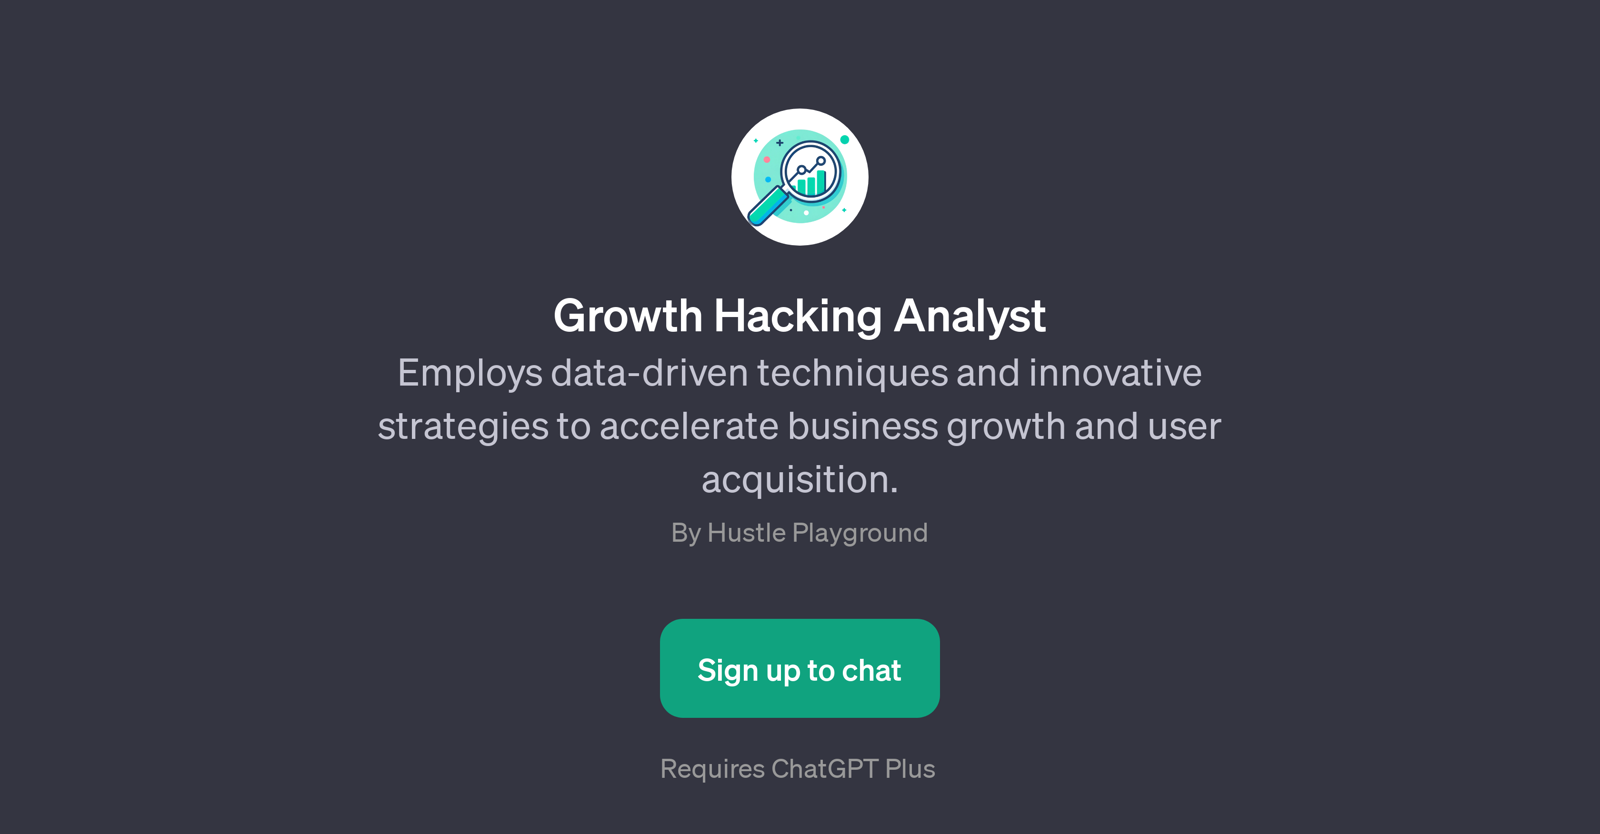 Growth Hacking Analyst website